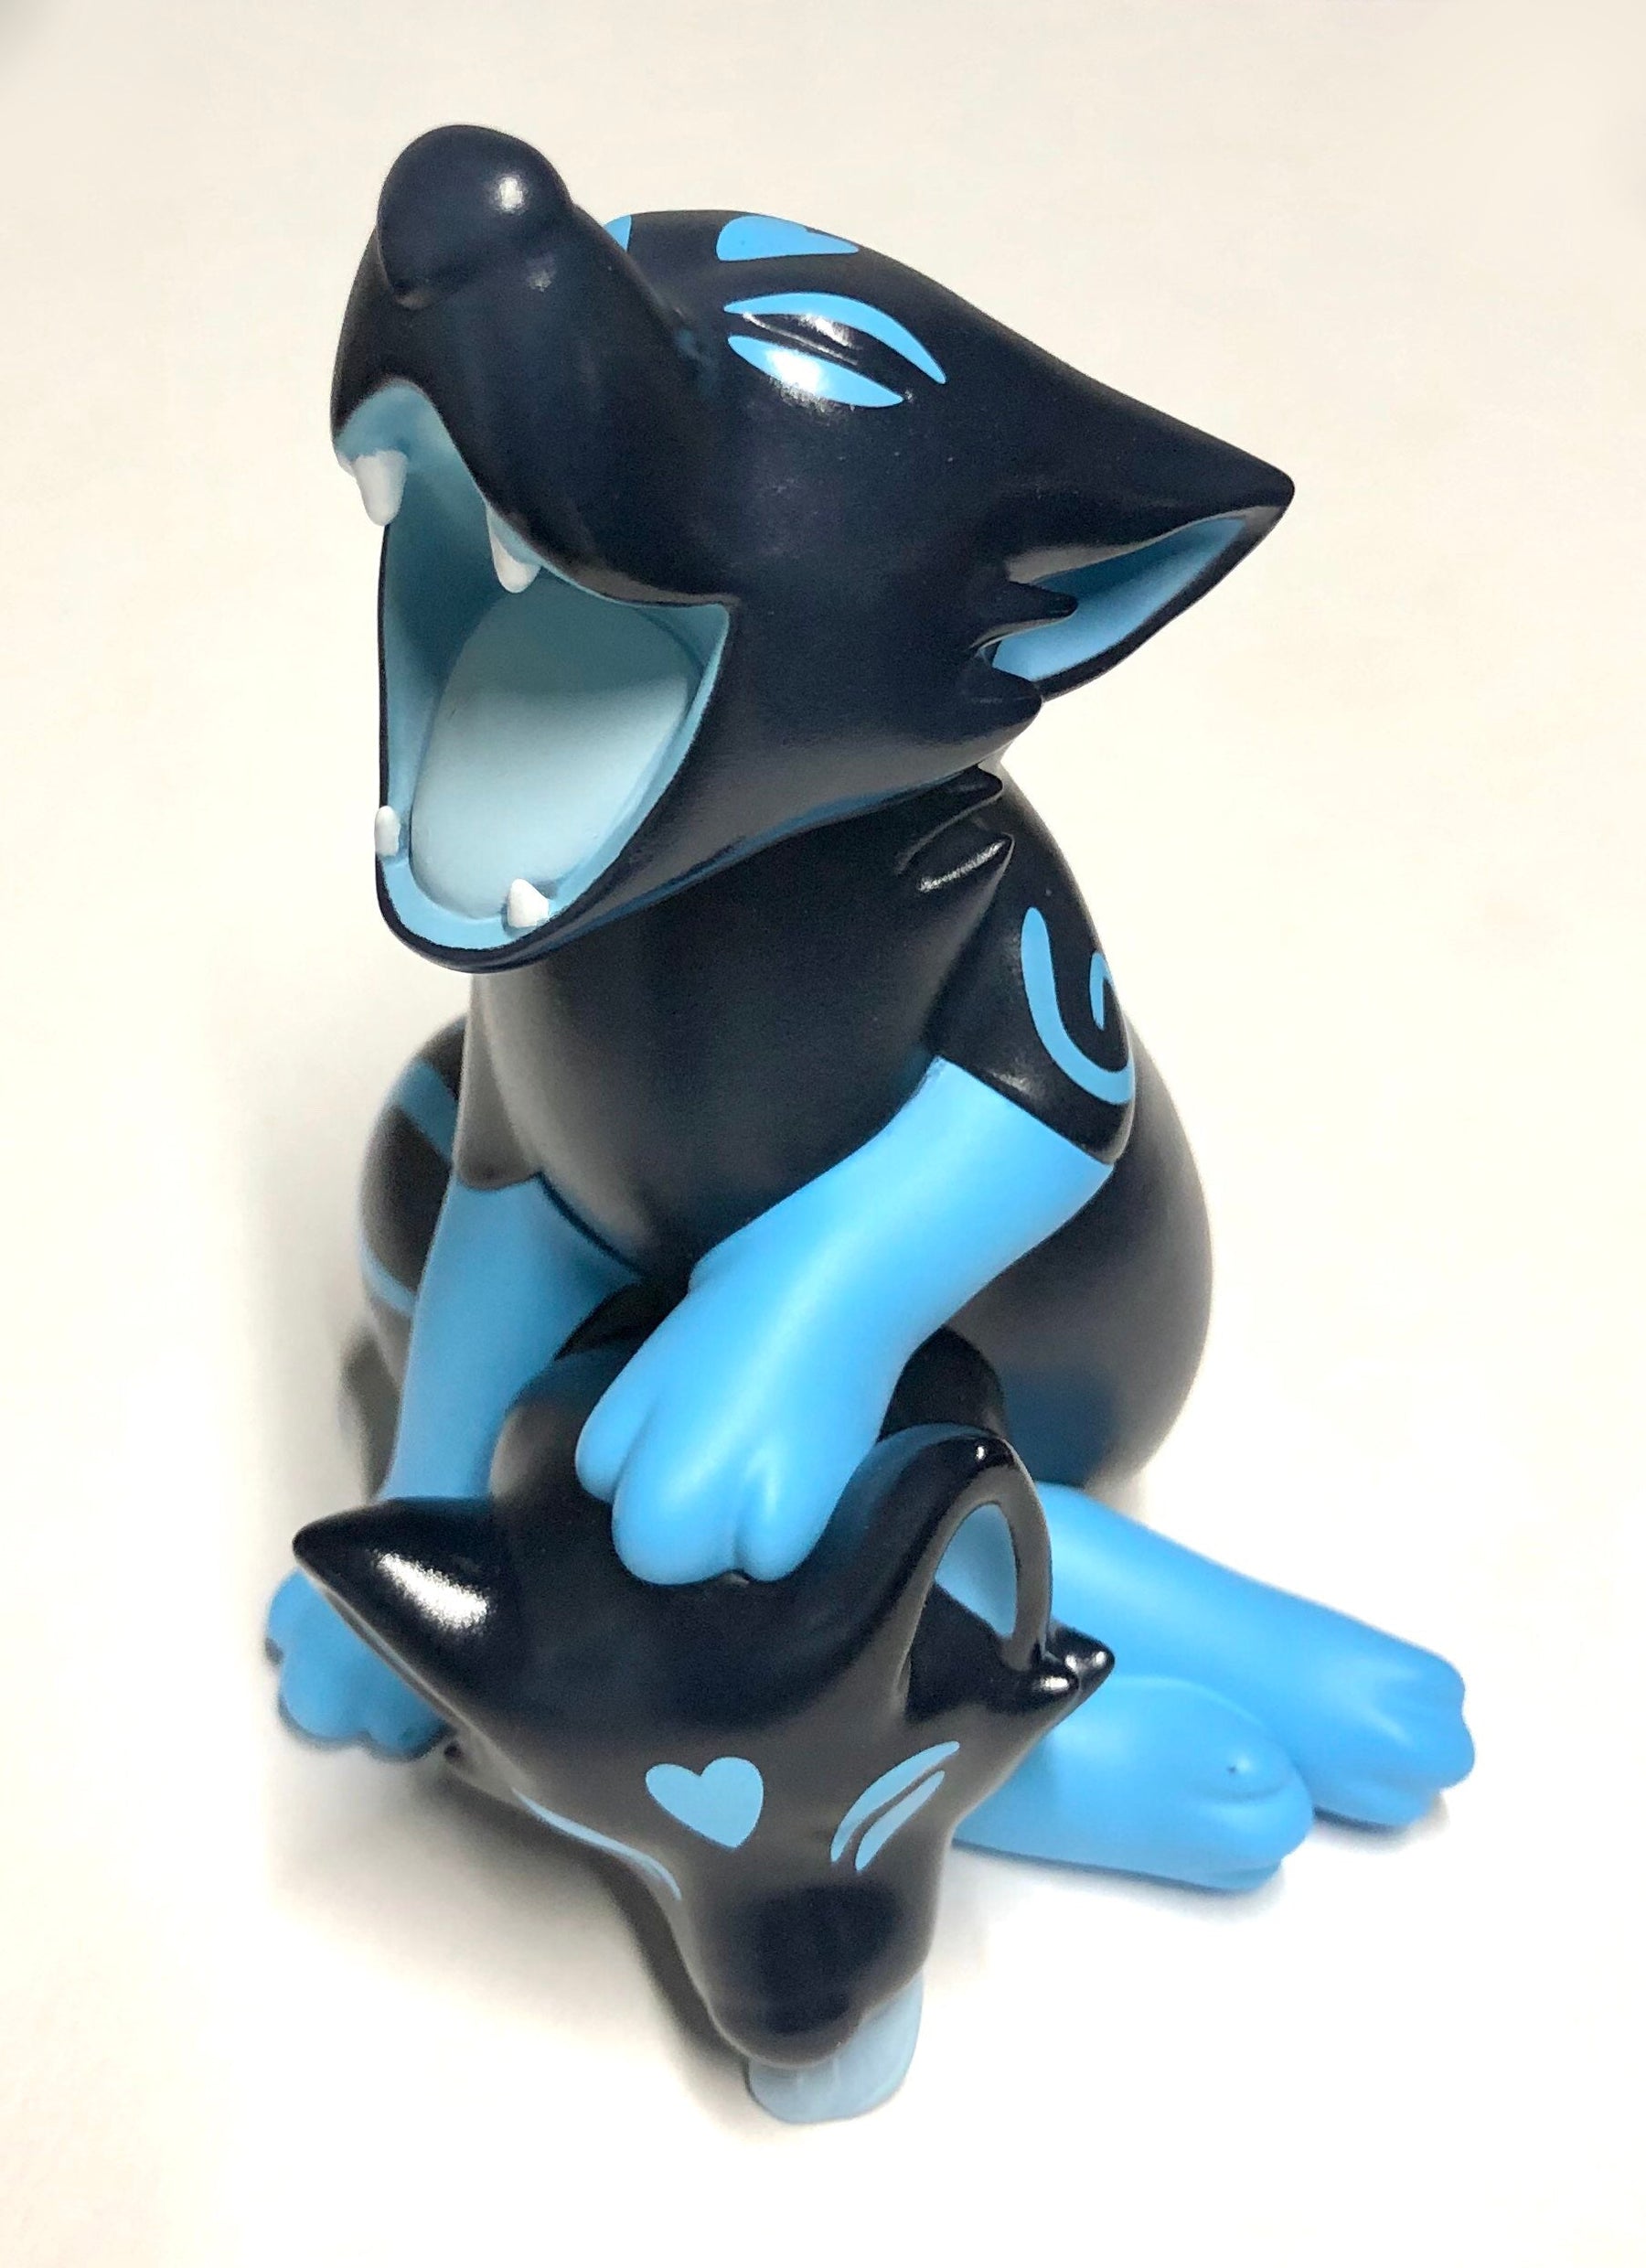 Binimals KitKit 4-inch vinyl figure by TheRoguez Available Now ! ! !